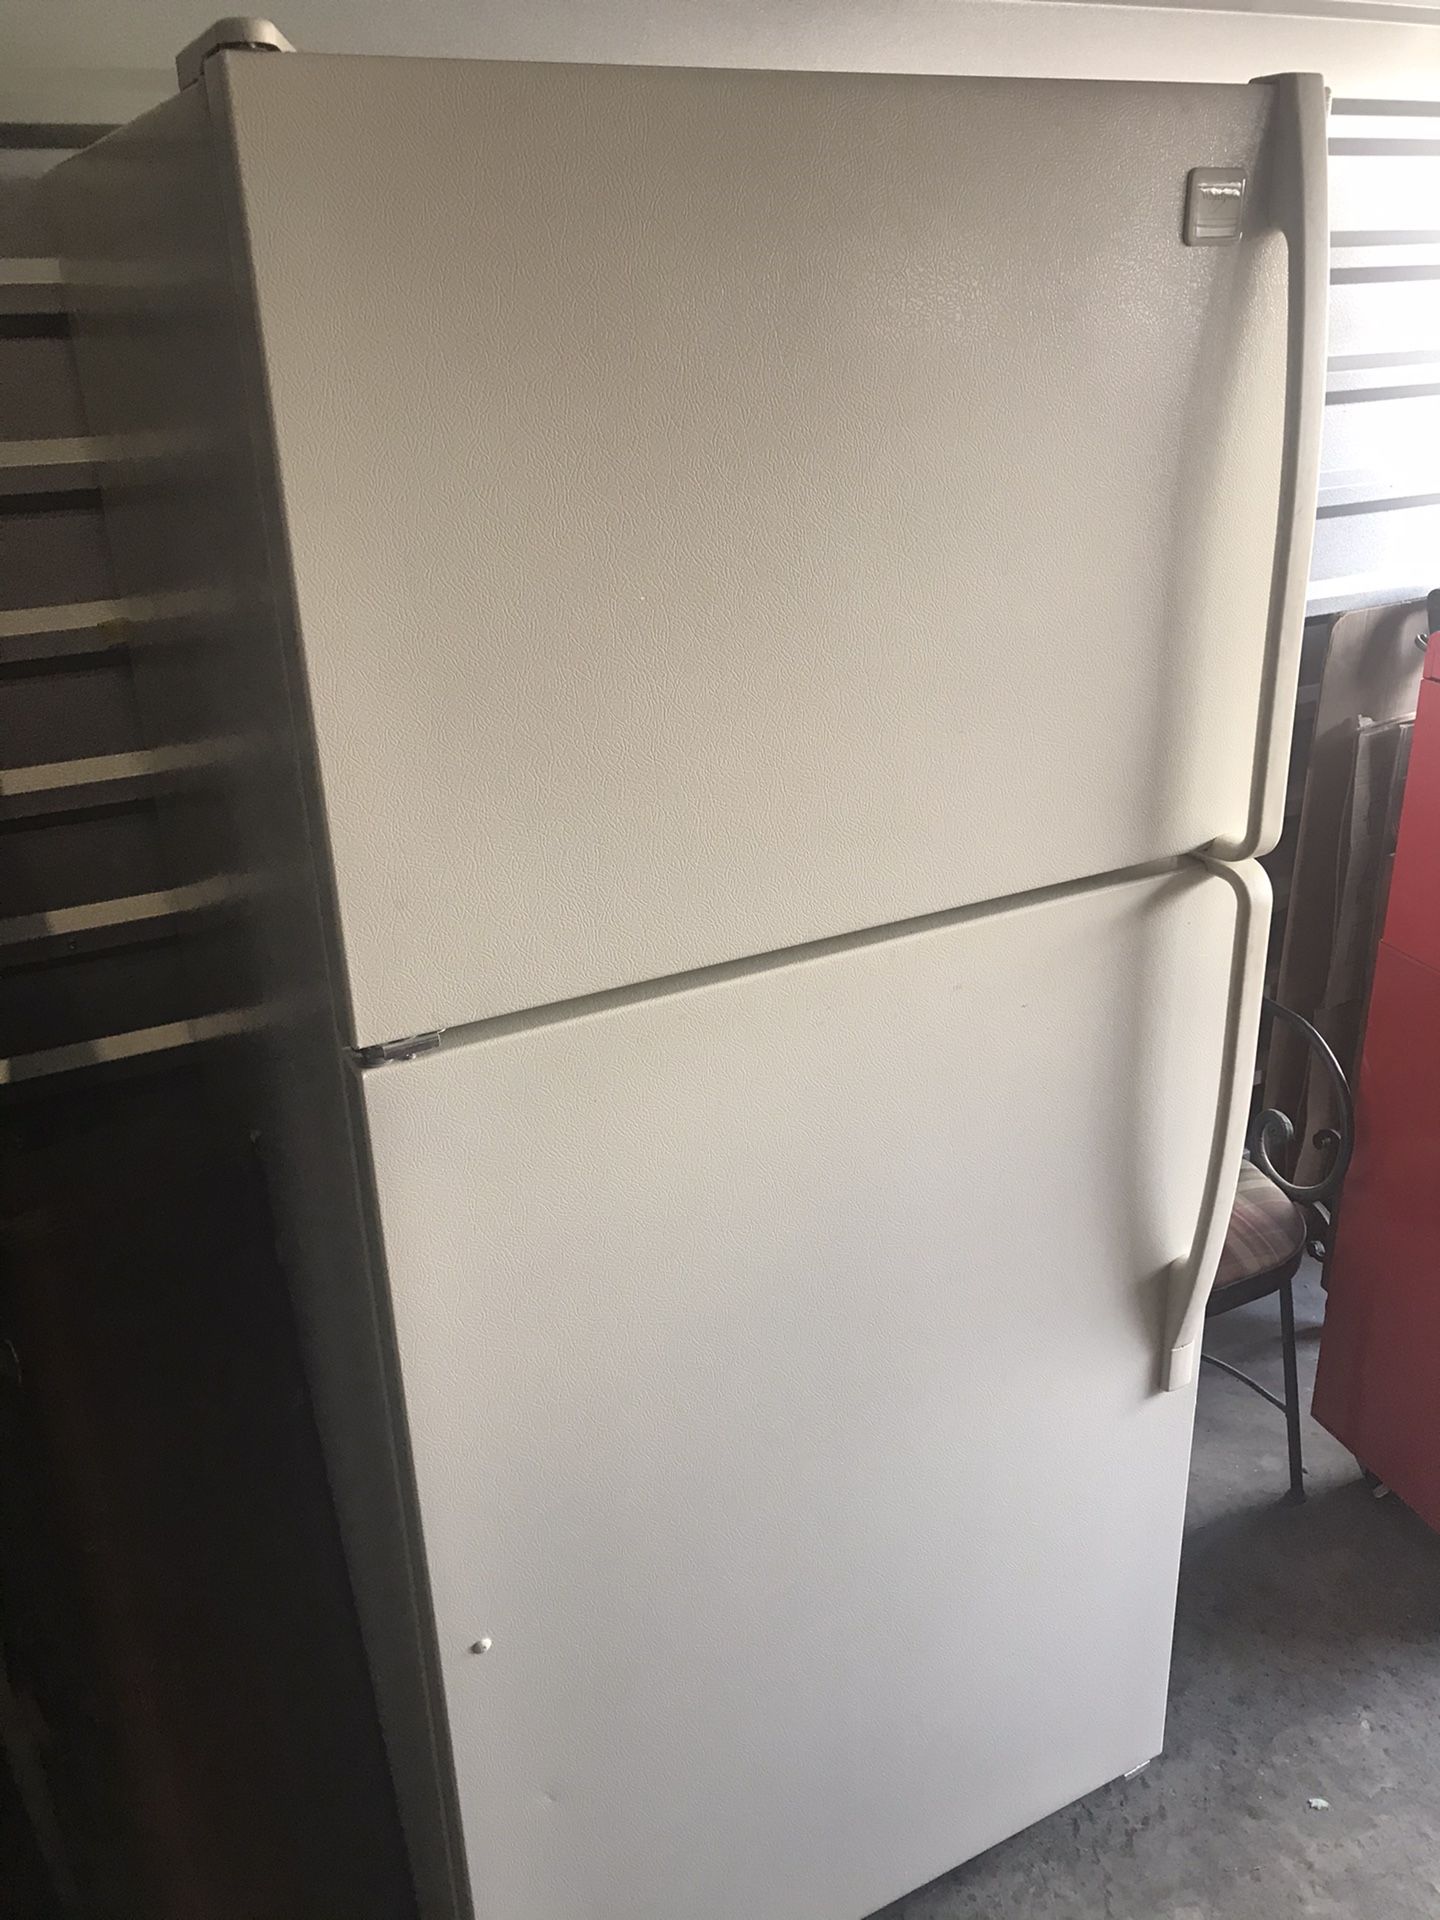 Clean, white top freezer over refrigerator. With ice maker.